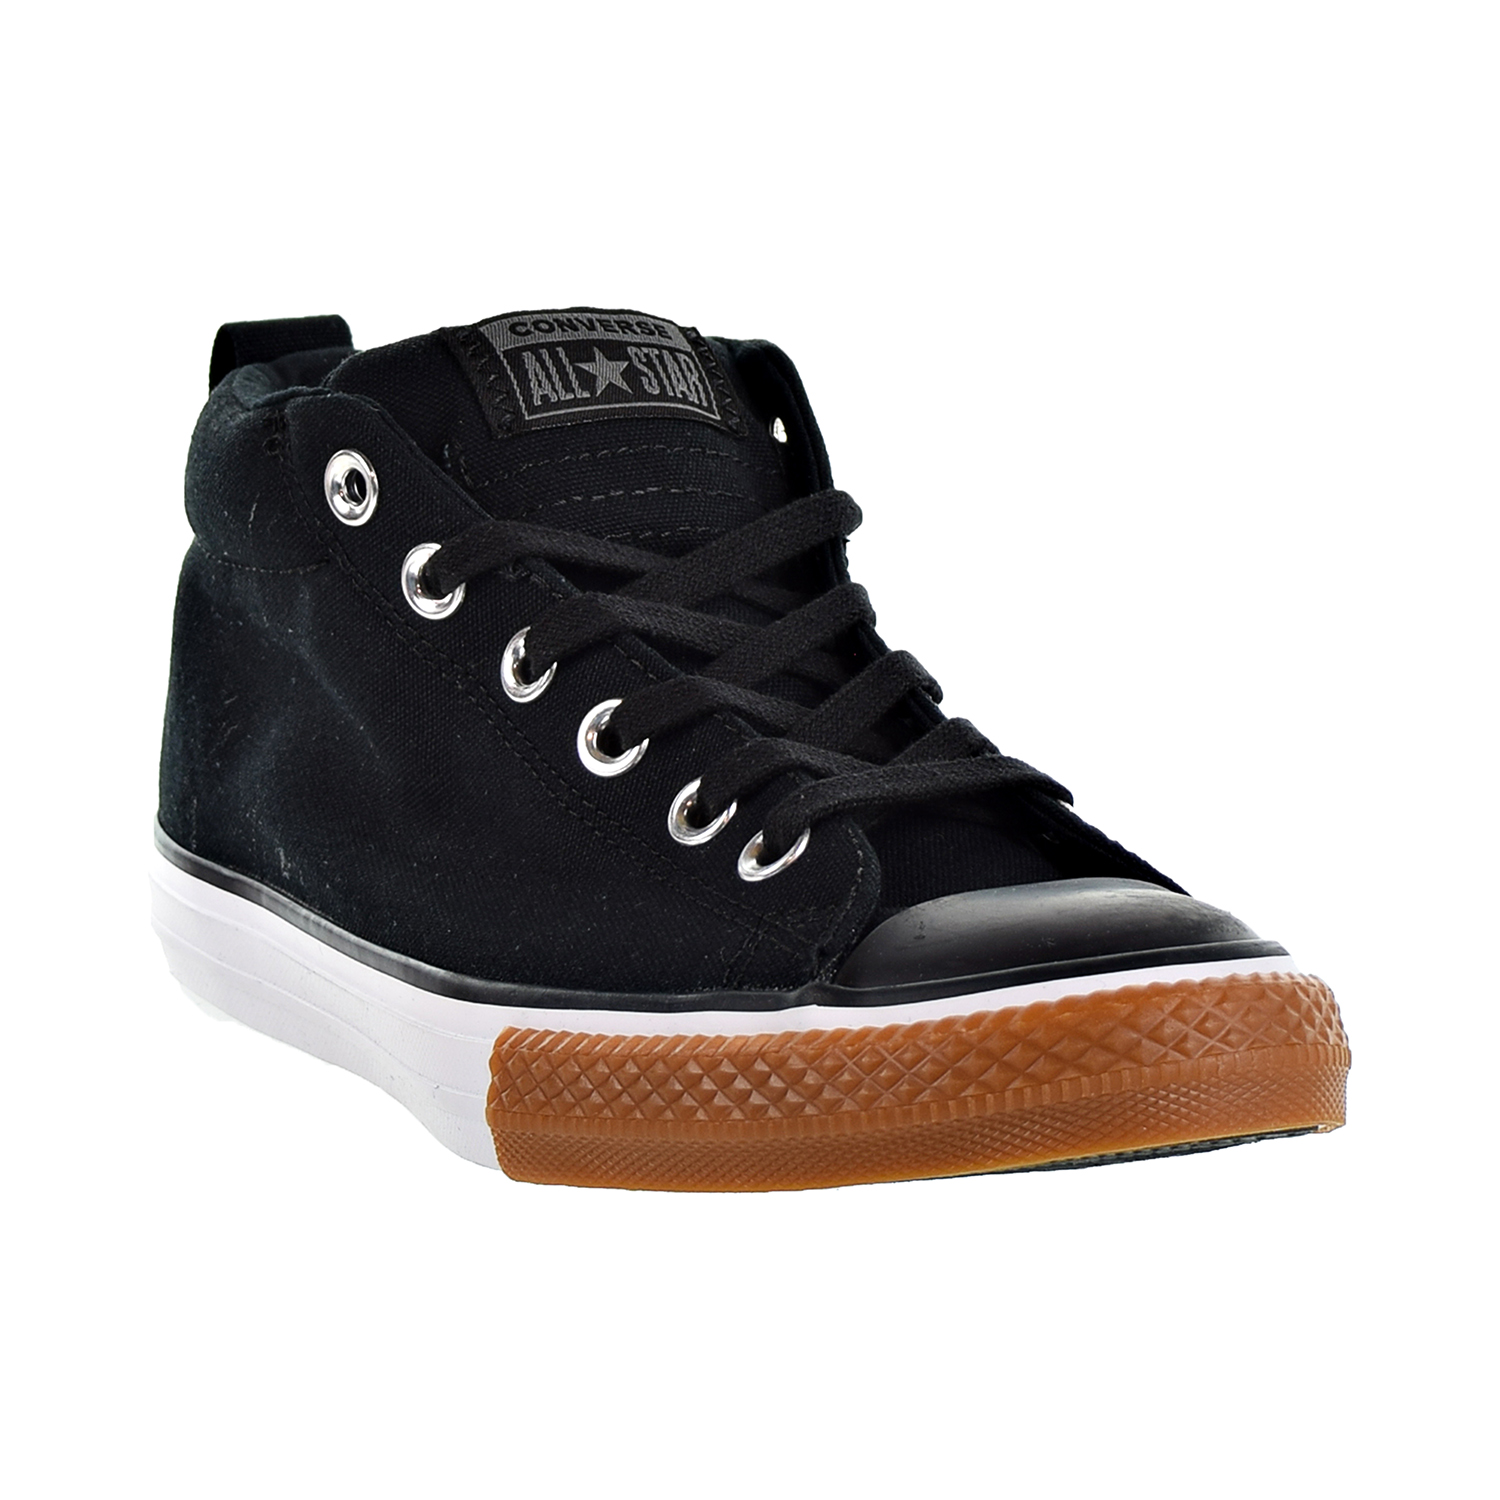 Converse Chuck Taylor All Star Street Mid Kids Shoes Black/Black/White 661908f - image 2 of 6